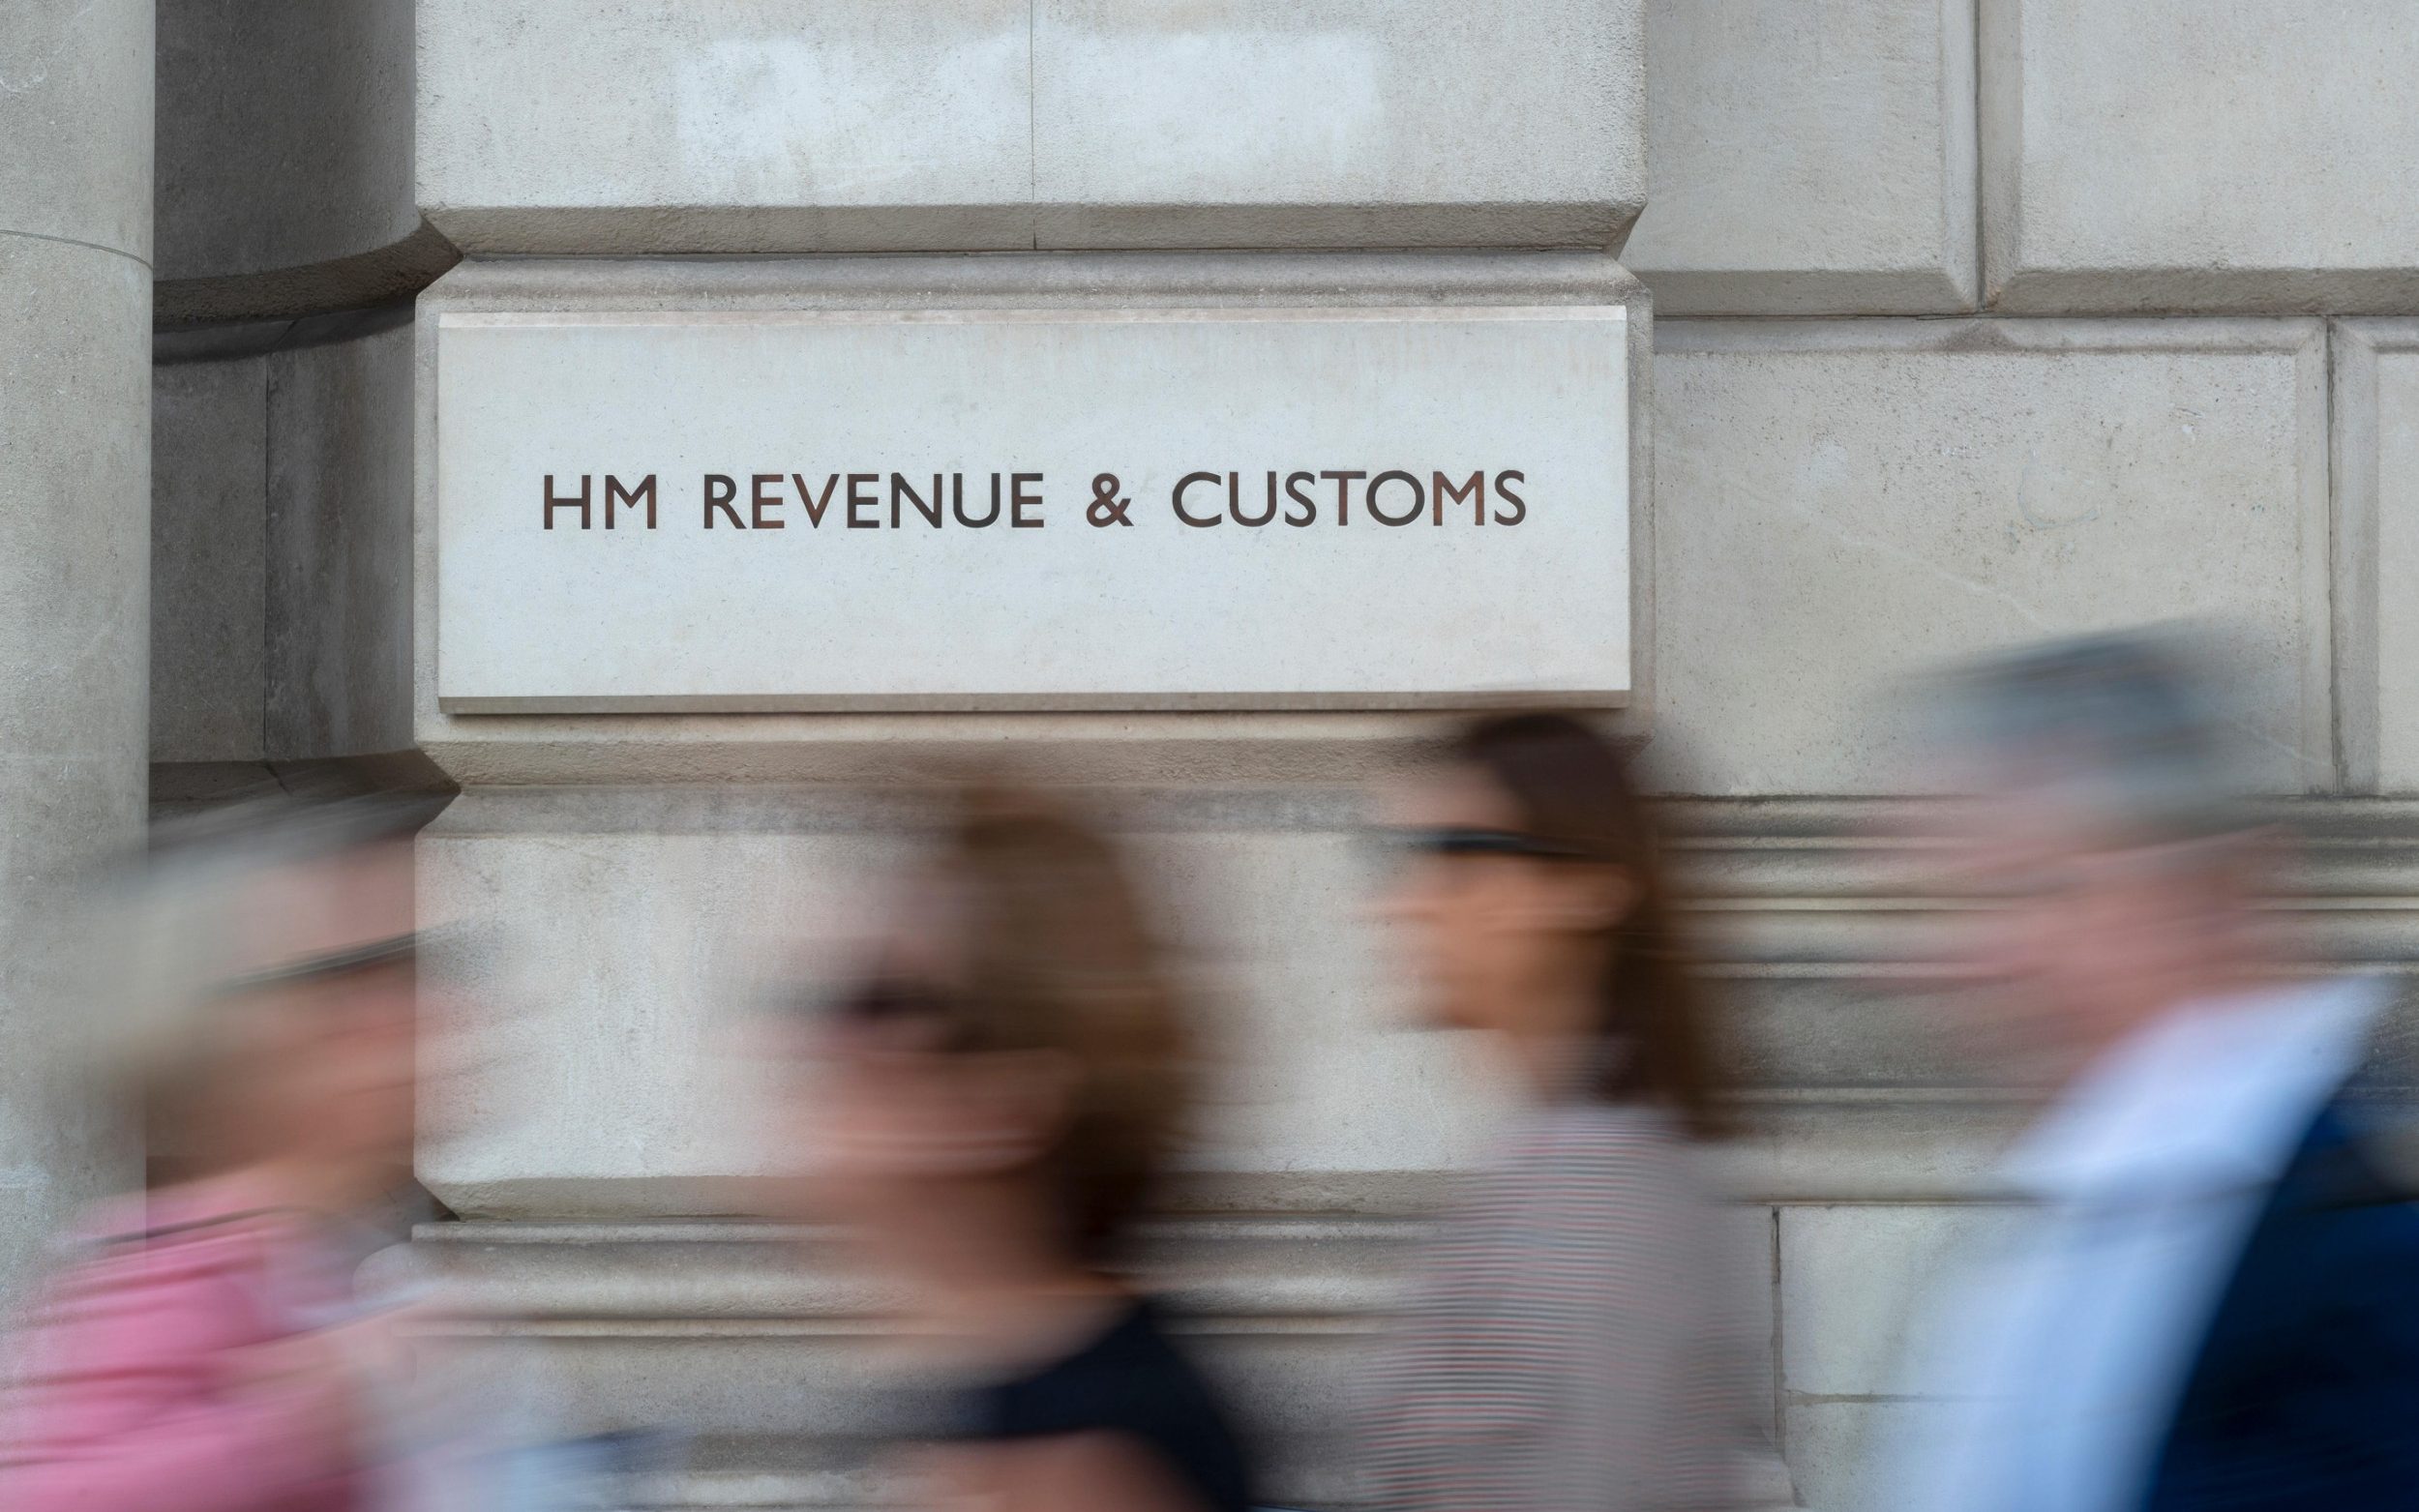 hmrc hit with 600 complaints a week as ‘taxpayers at wits end’